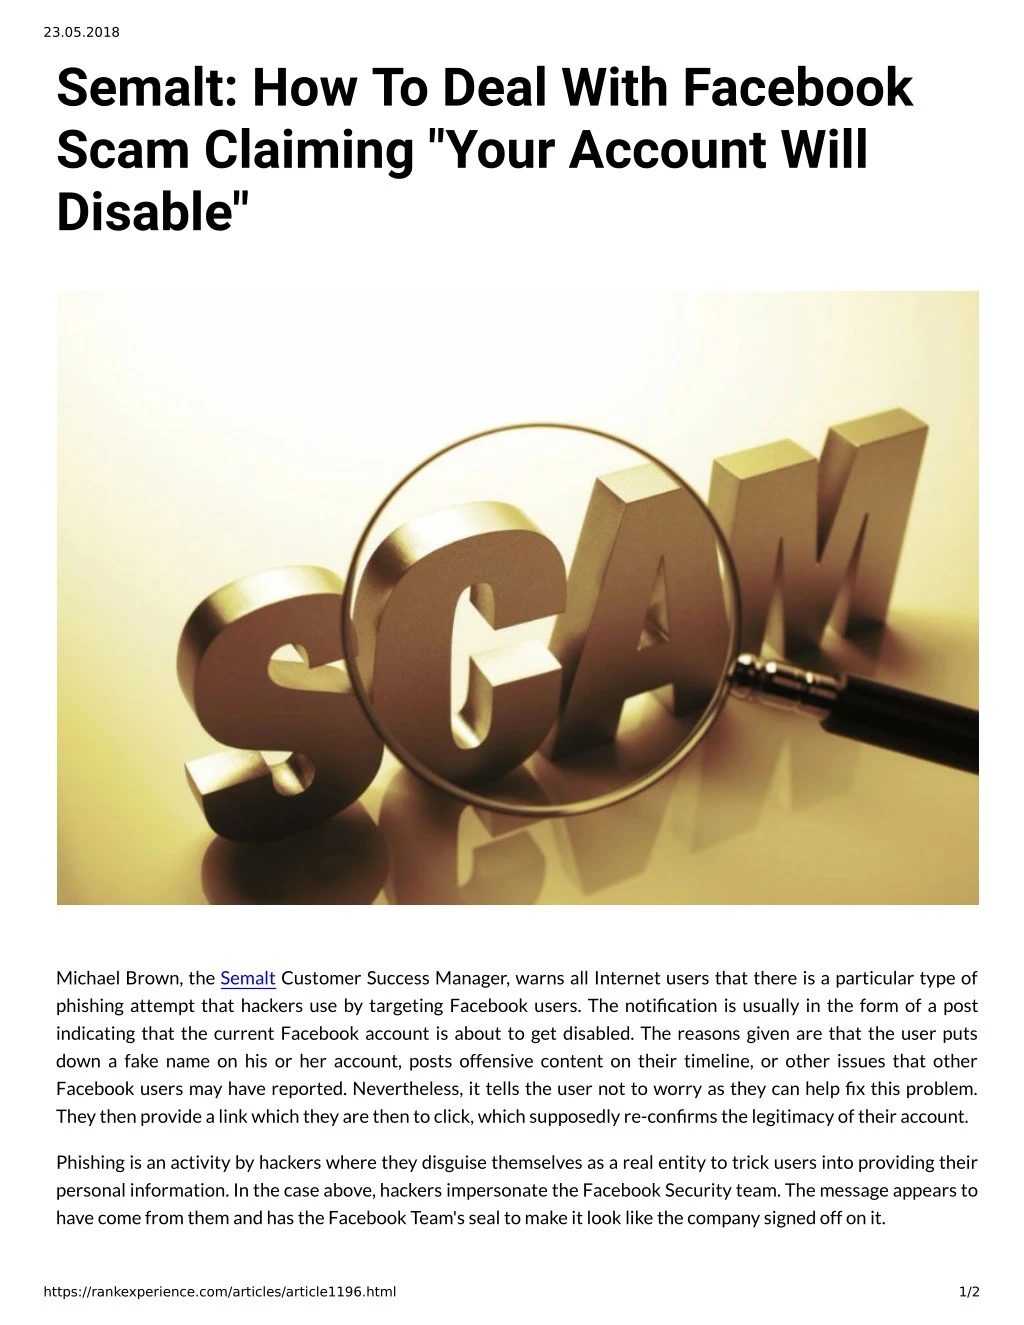 23 05 2018 semalt how to deal with facebook scam